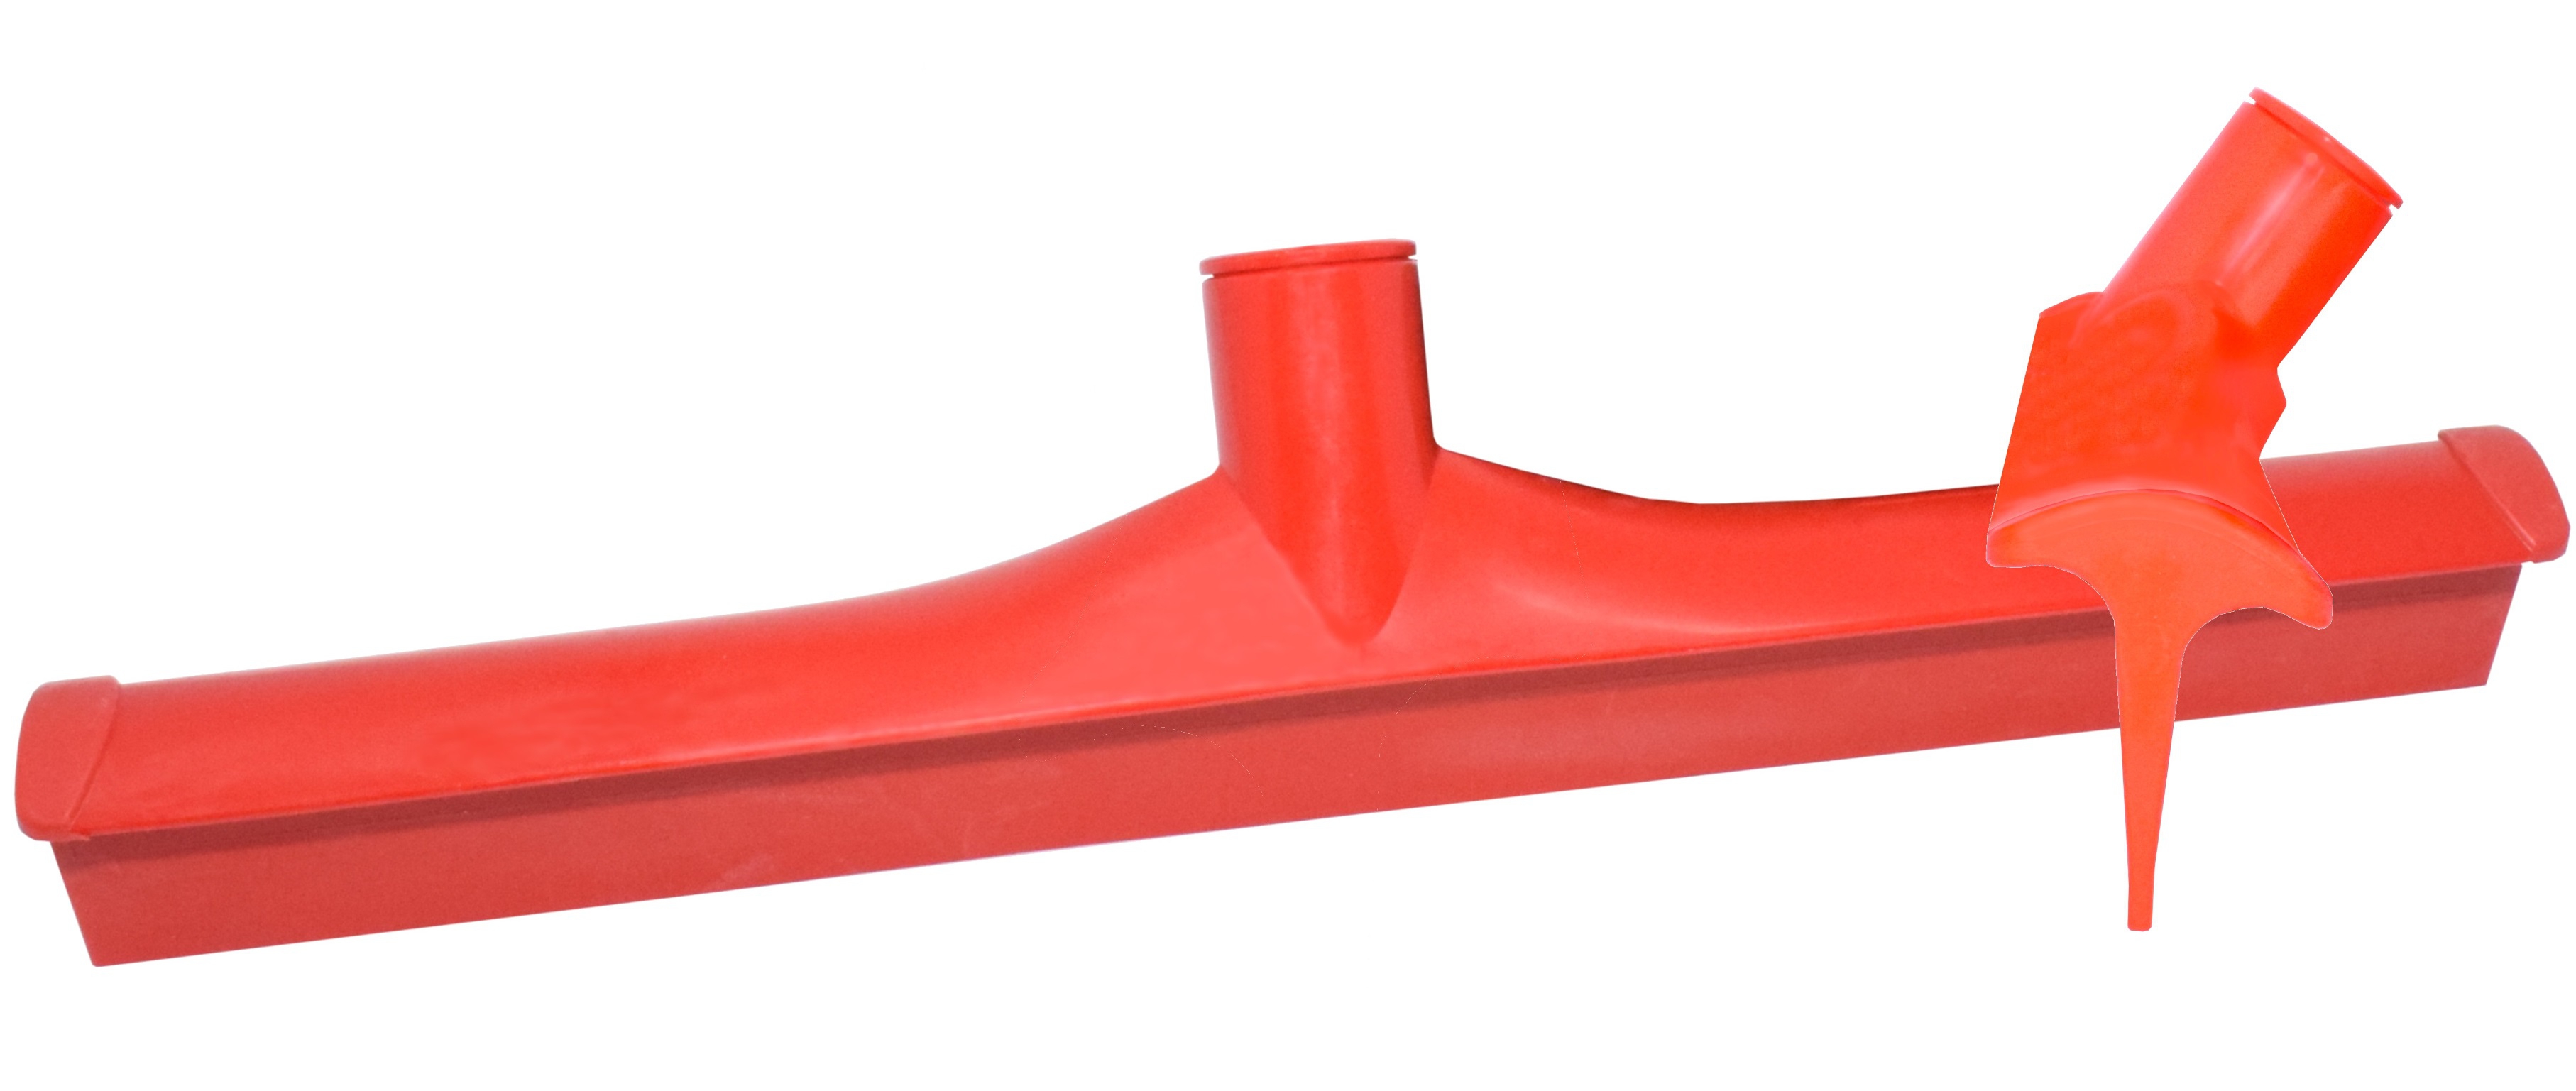 One-Piece Rubber Squeegee red